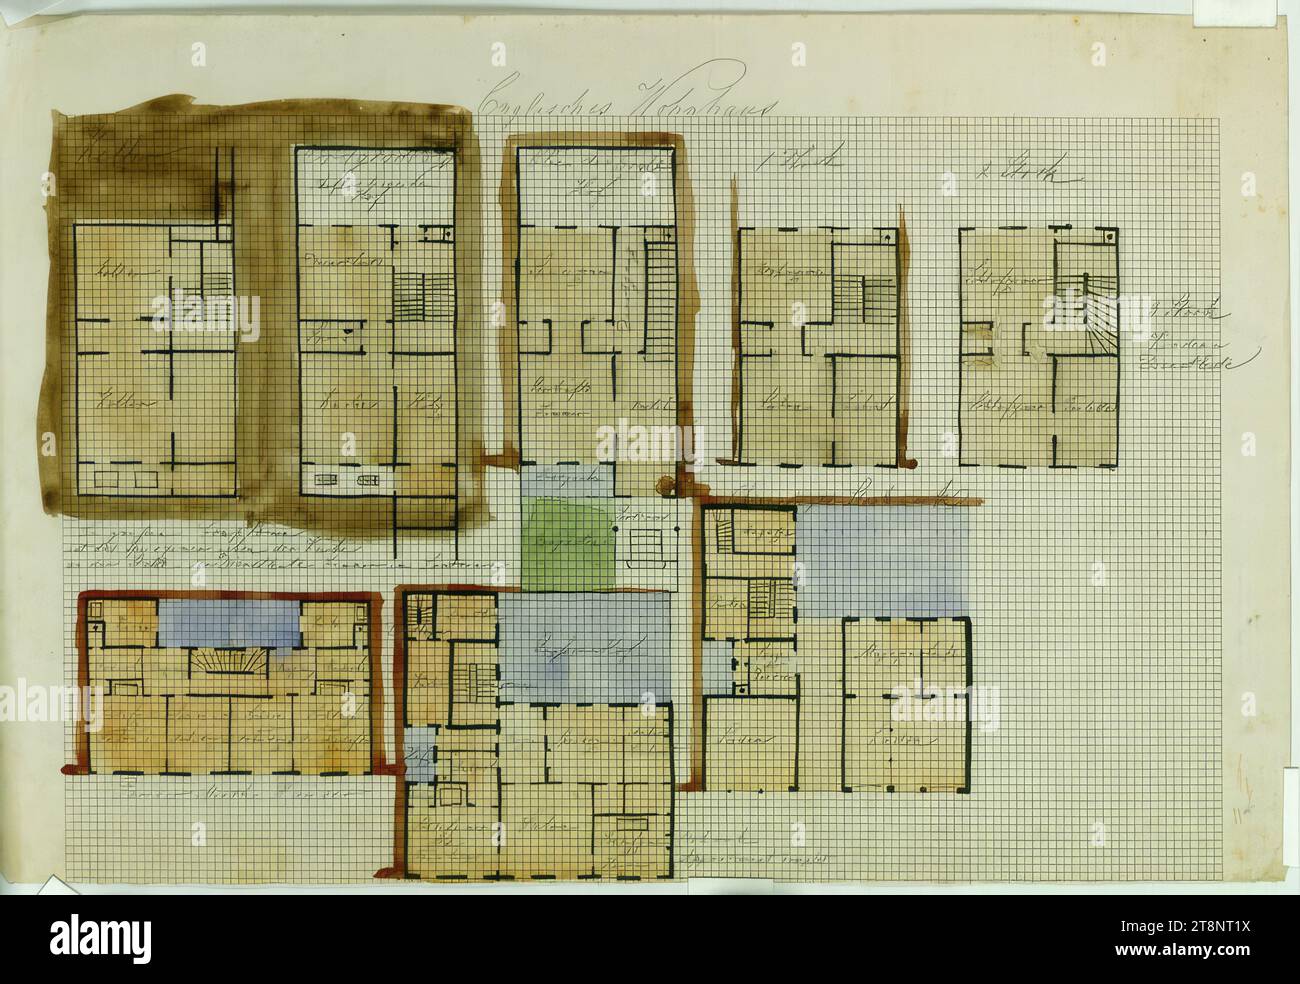 English and Paris residential building, floor plans, Carl von Hasenauer (Vienna 1833 - 1894 Vienna), plan, pencil, watercoloured, 262 x 394 mm, 'English residential building', 'In larger offices/ the dining room (sic) is next to the kitchen/ on the location of the servants' room in the basement (sic)', 'Pariser Mieth houses Stock Photo